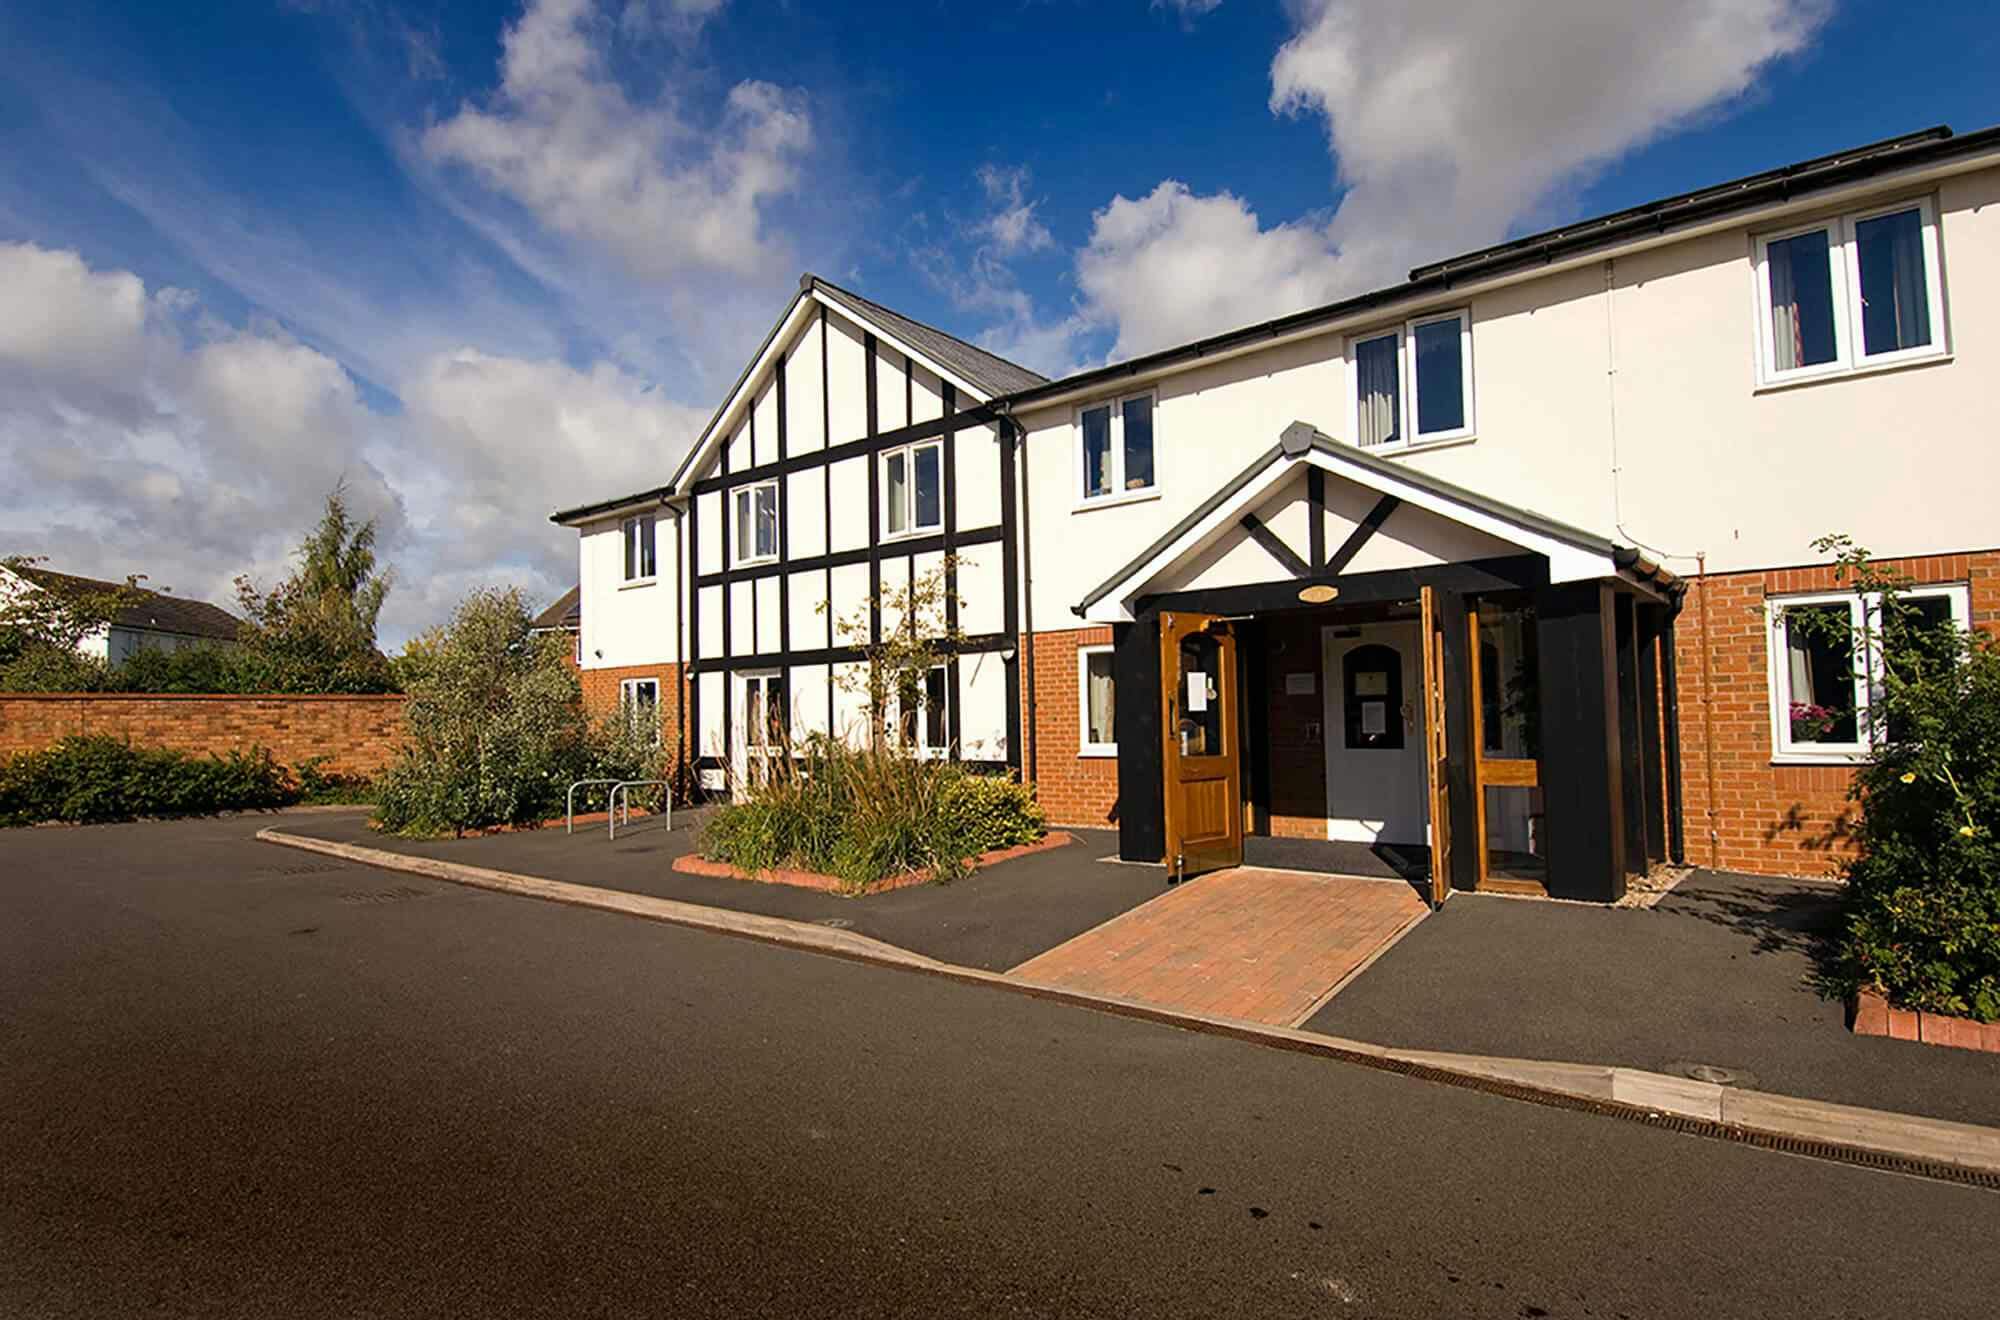 Waterside care home